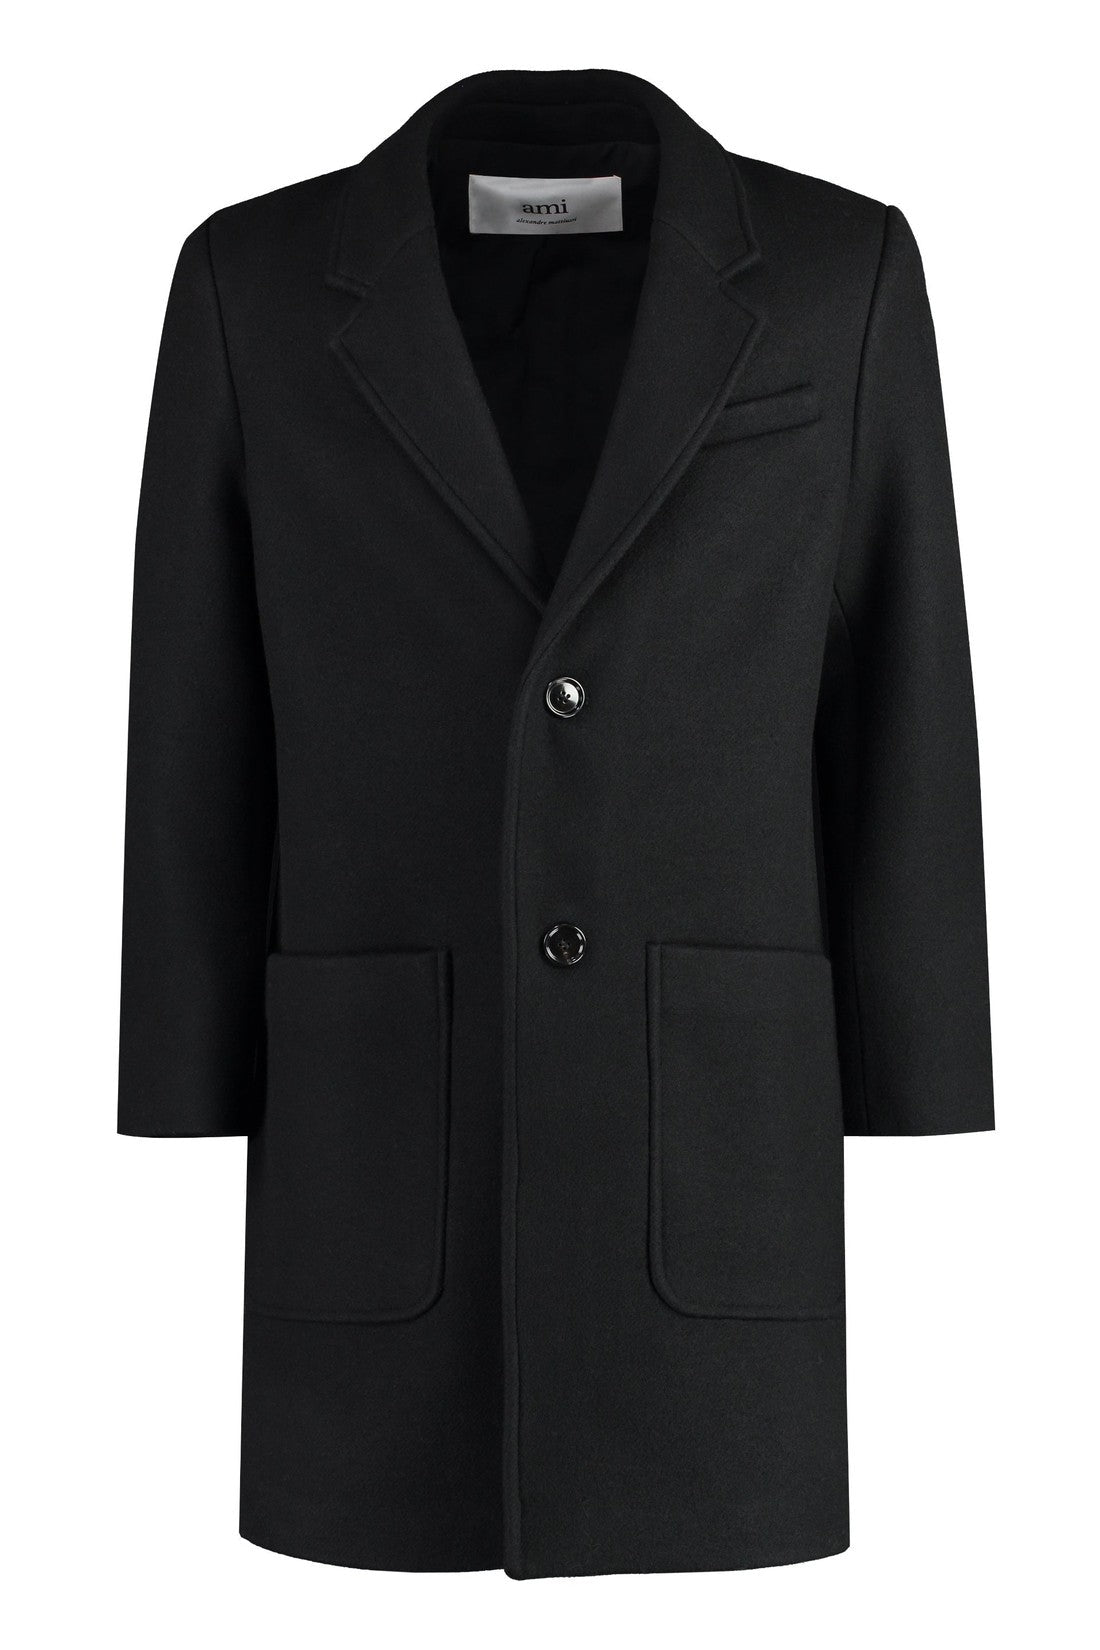 AMI PARIS-OUTLET-SALE-Single-breasted wool coat-ARCHIVIST